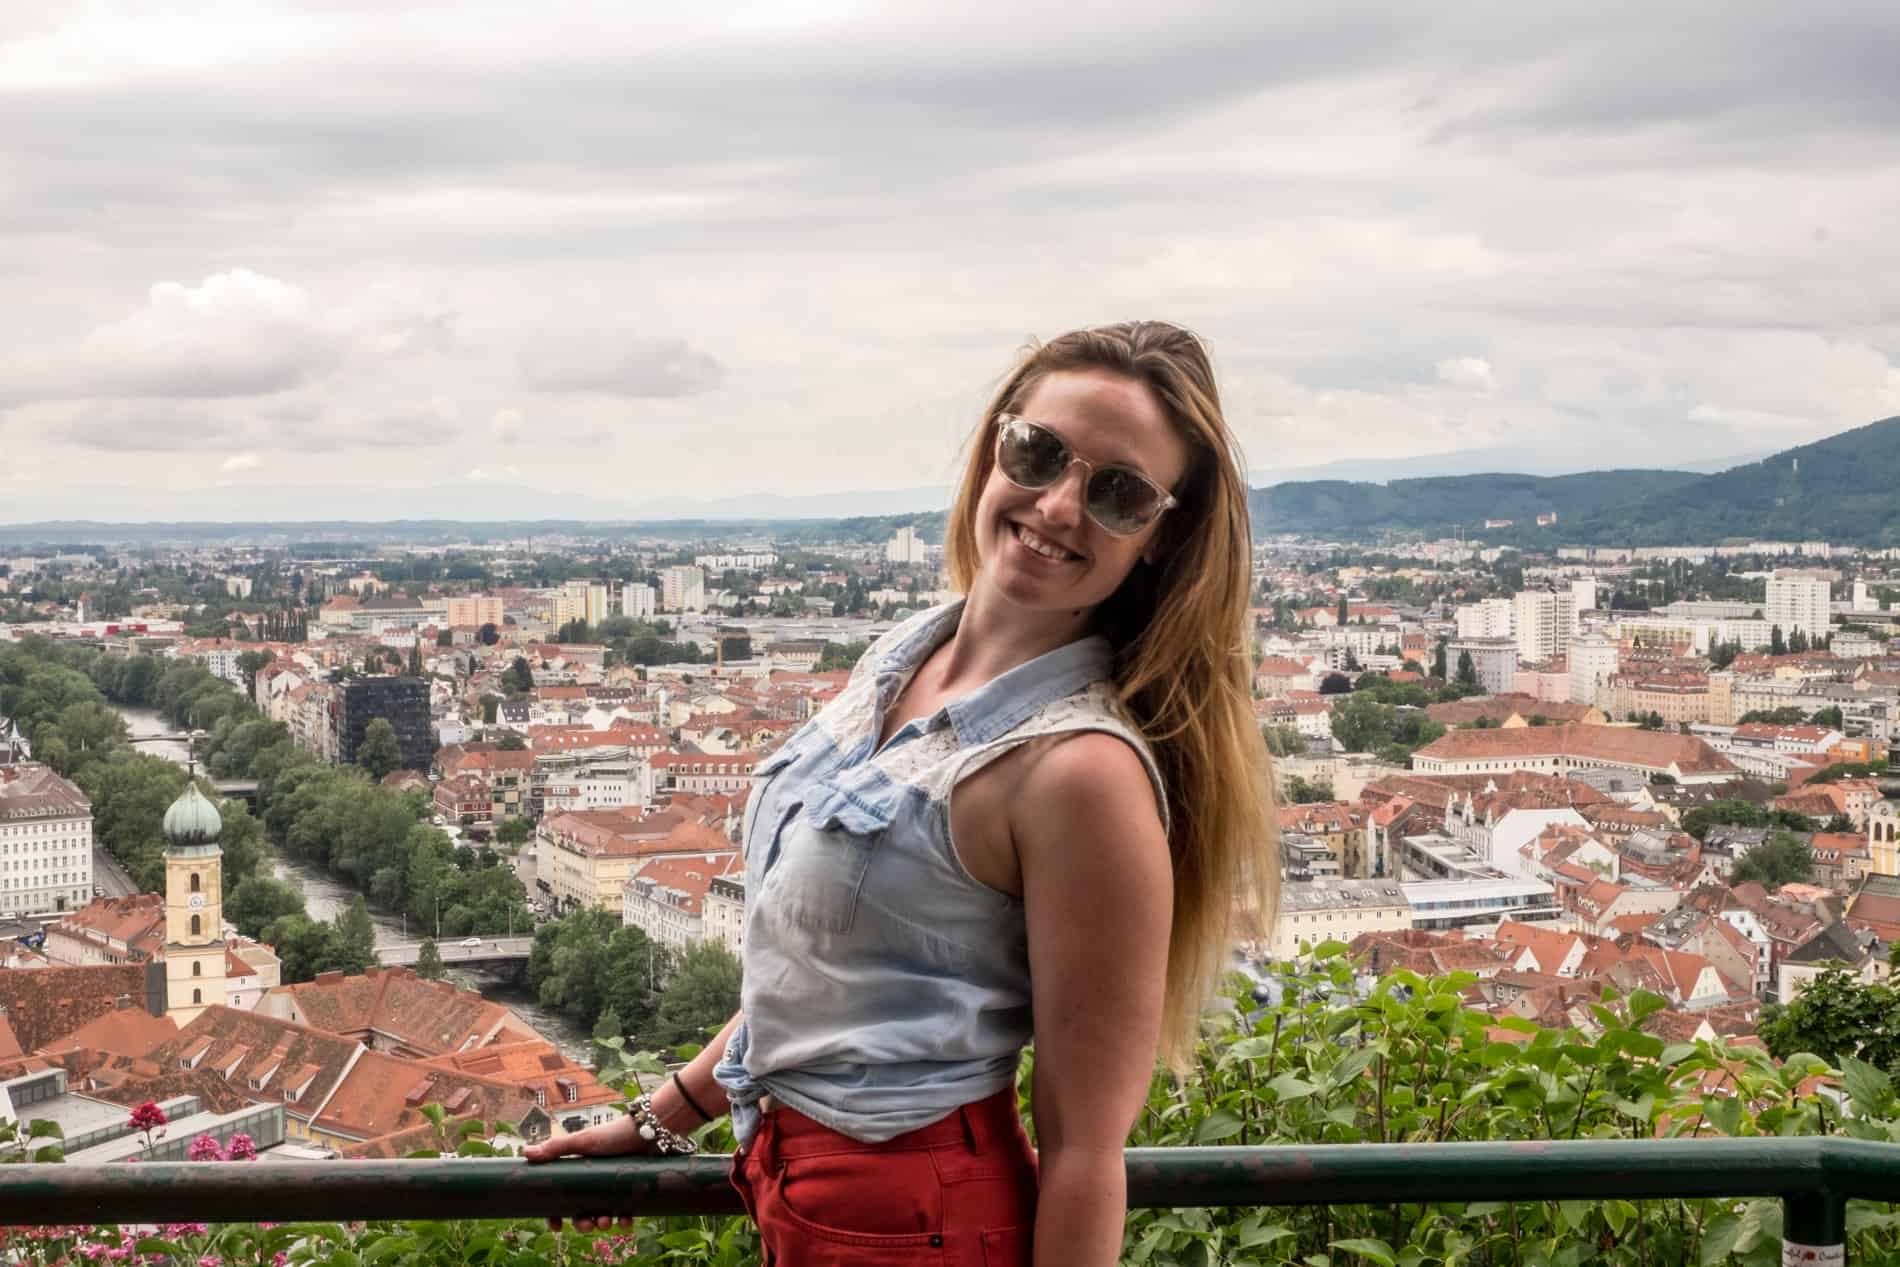 A woman smiles to camera to backdrop of Graz from the elevated viewpoint of the Schlossberg.